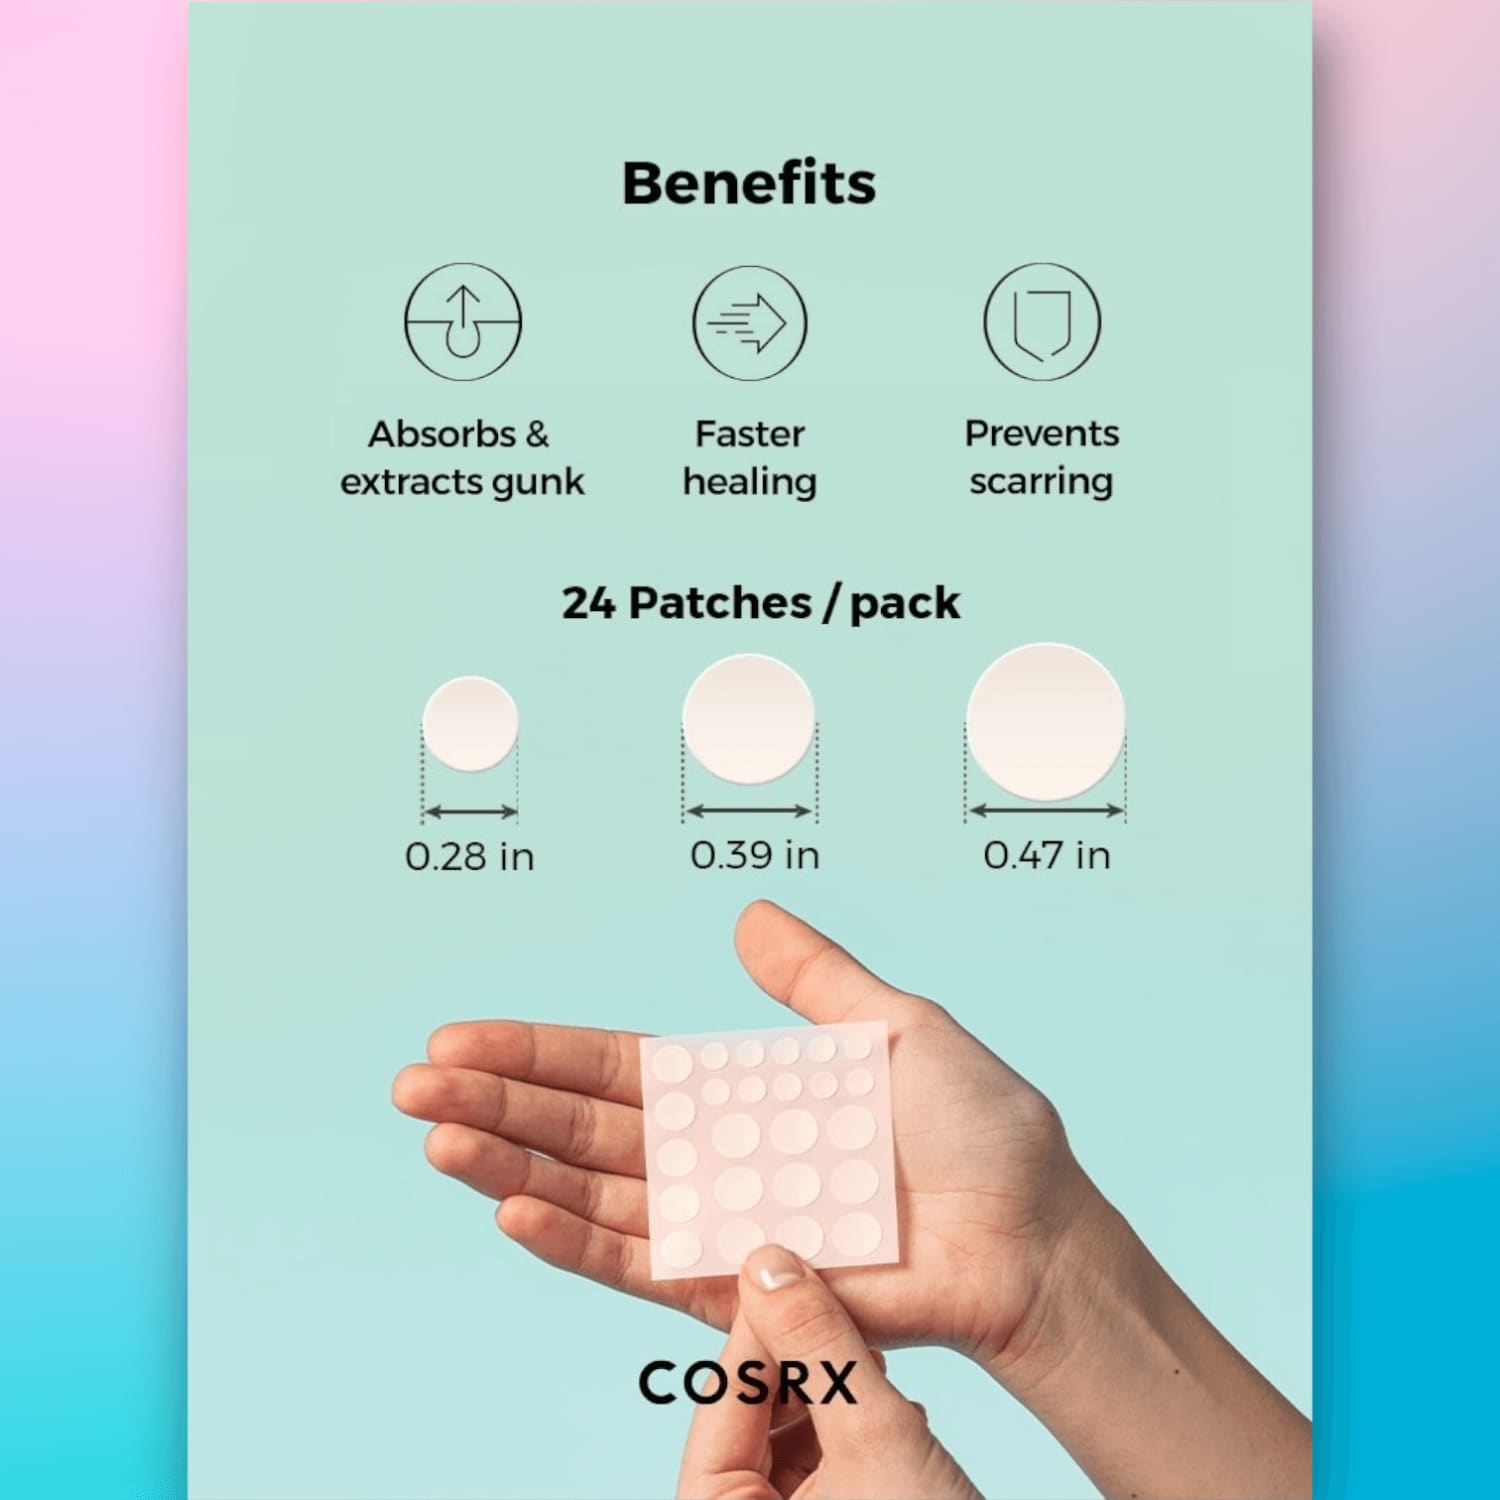 Cosrx Acne Pimple Master Patches - Pack Of 24 Beauty - Corsx